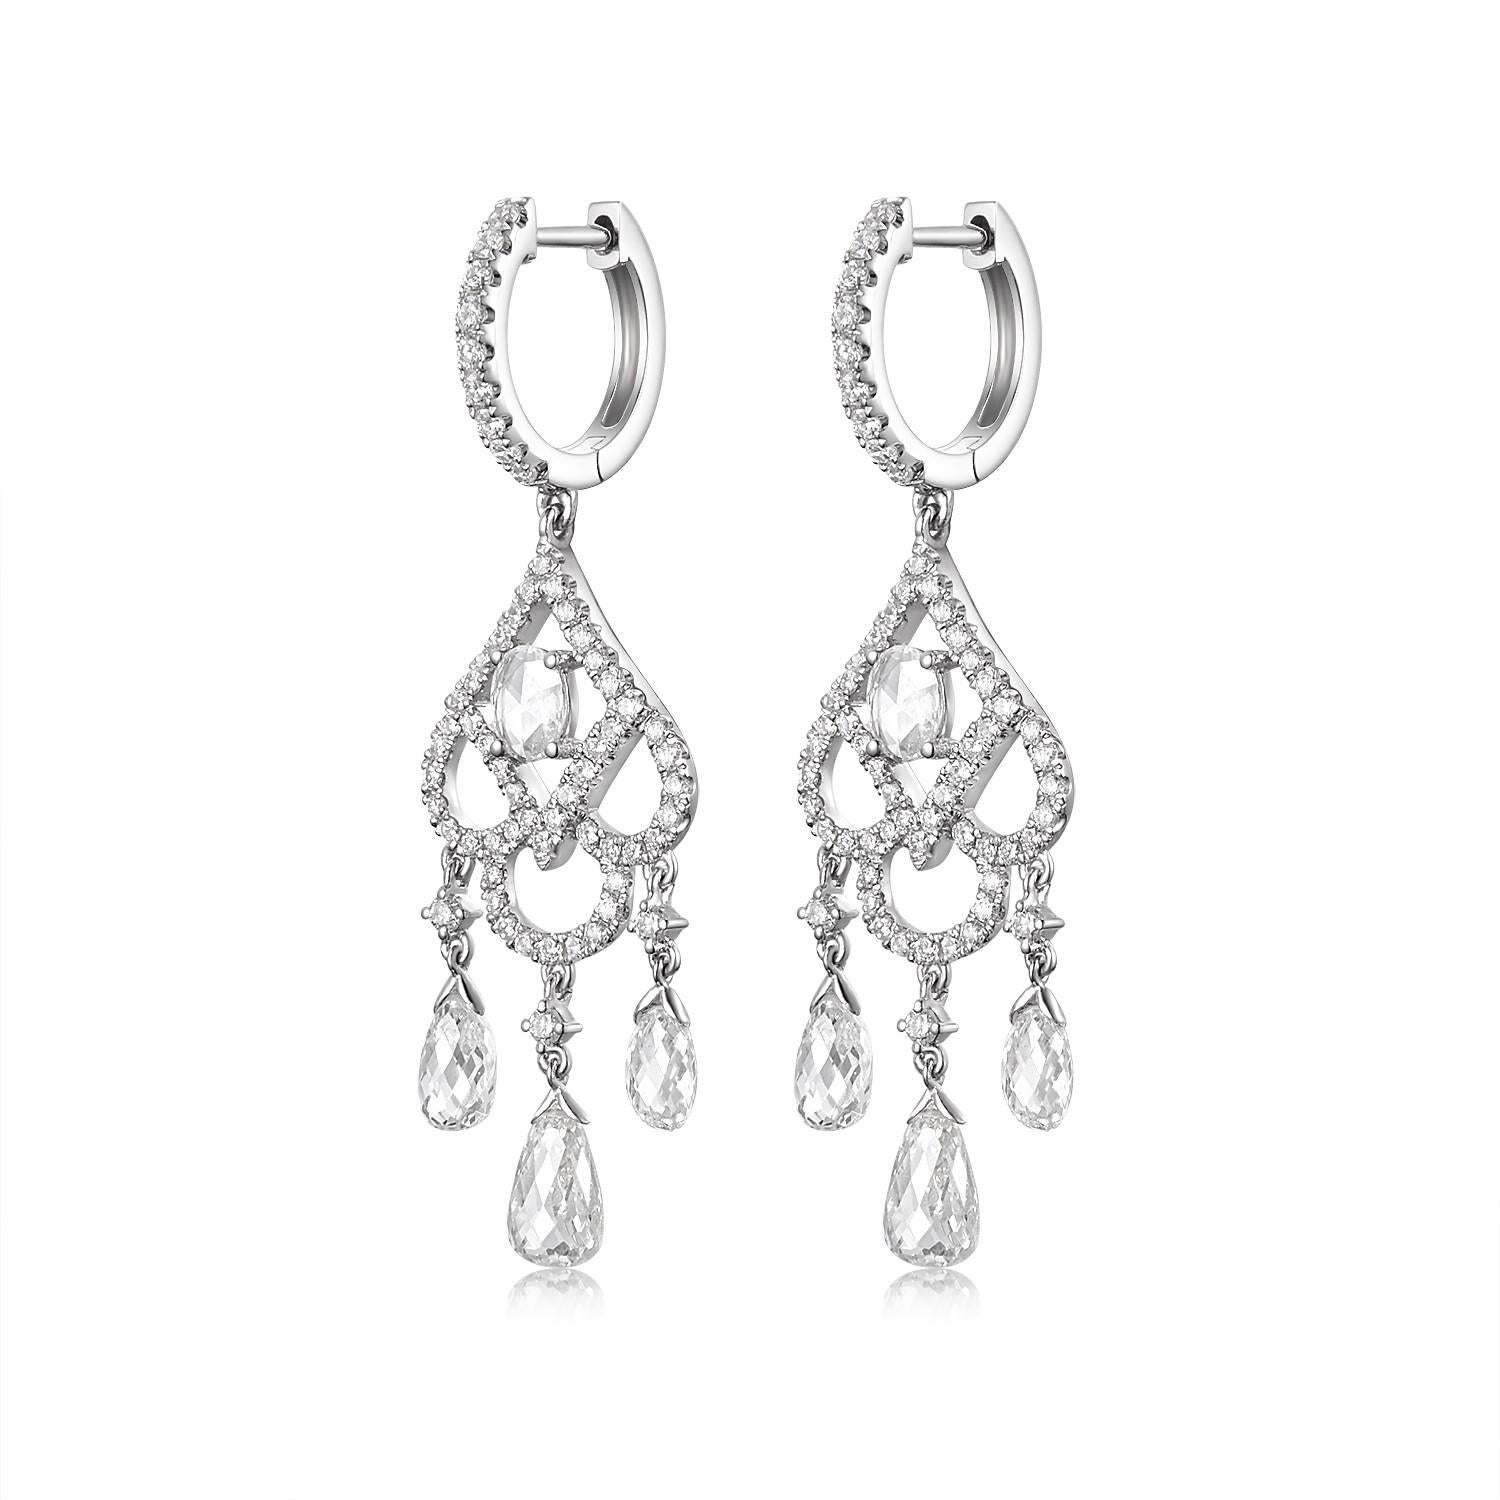 Embrace the timeless elegance of yesteryears with these stunning antique dangle earrings, meticulously crafted in lustrous 18 karat white gold.

At the heart of each earring lies a shimmering rose cut diamond, weighing a collective 0.2 carats. Known